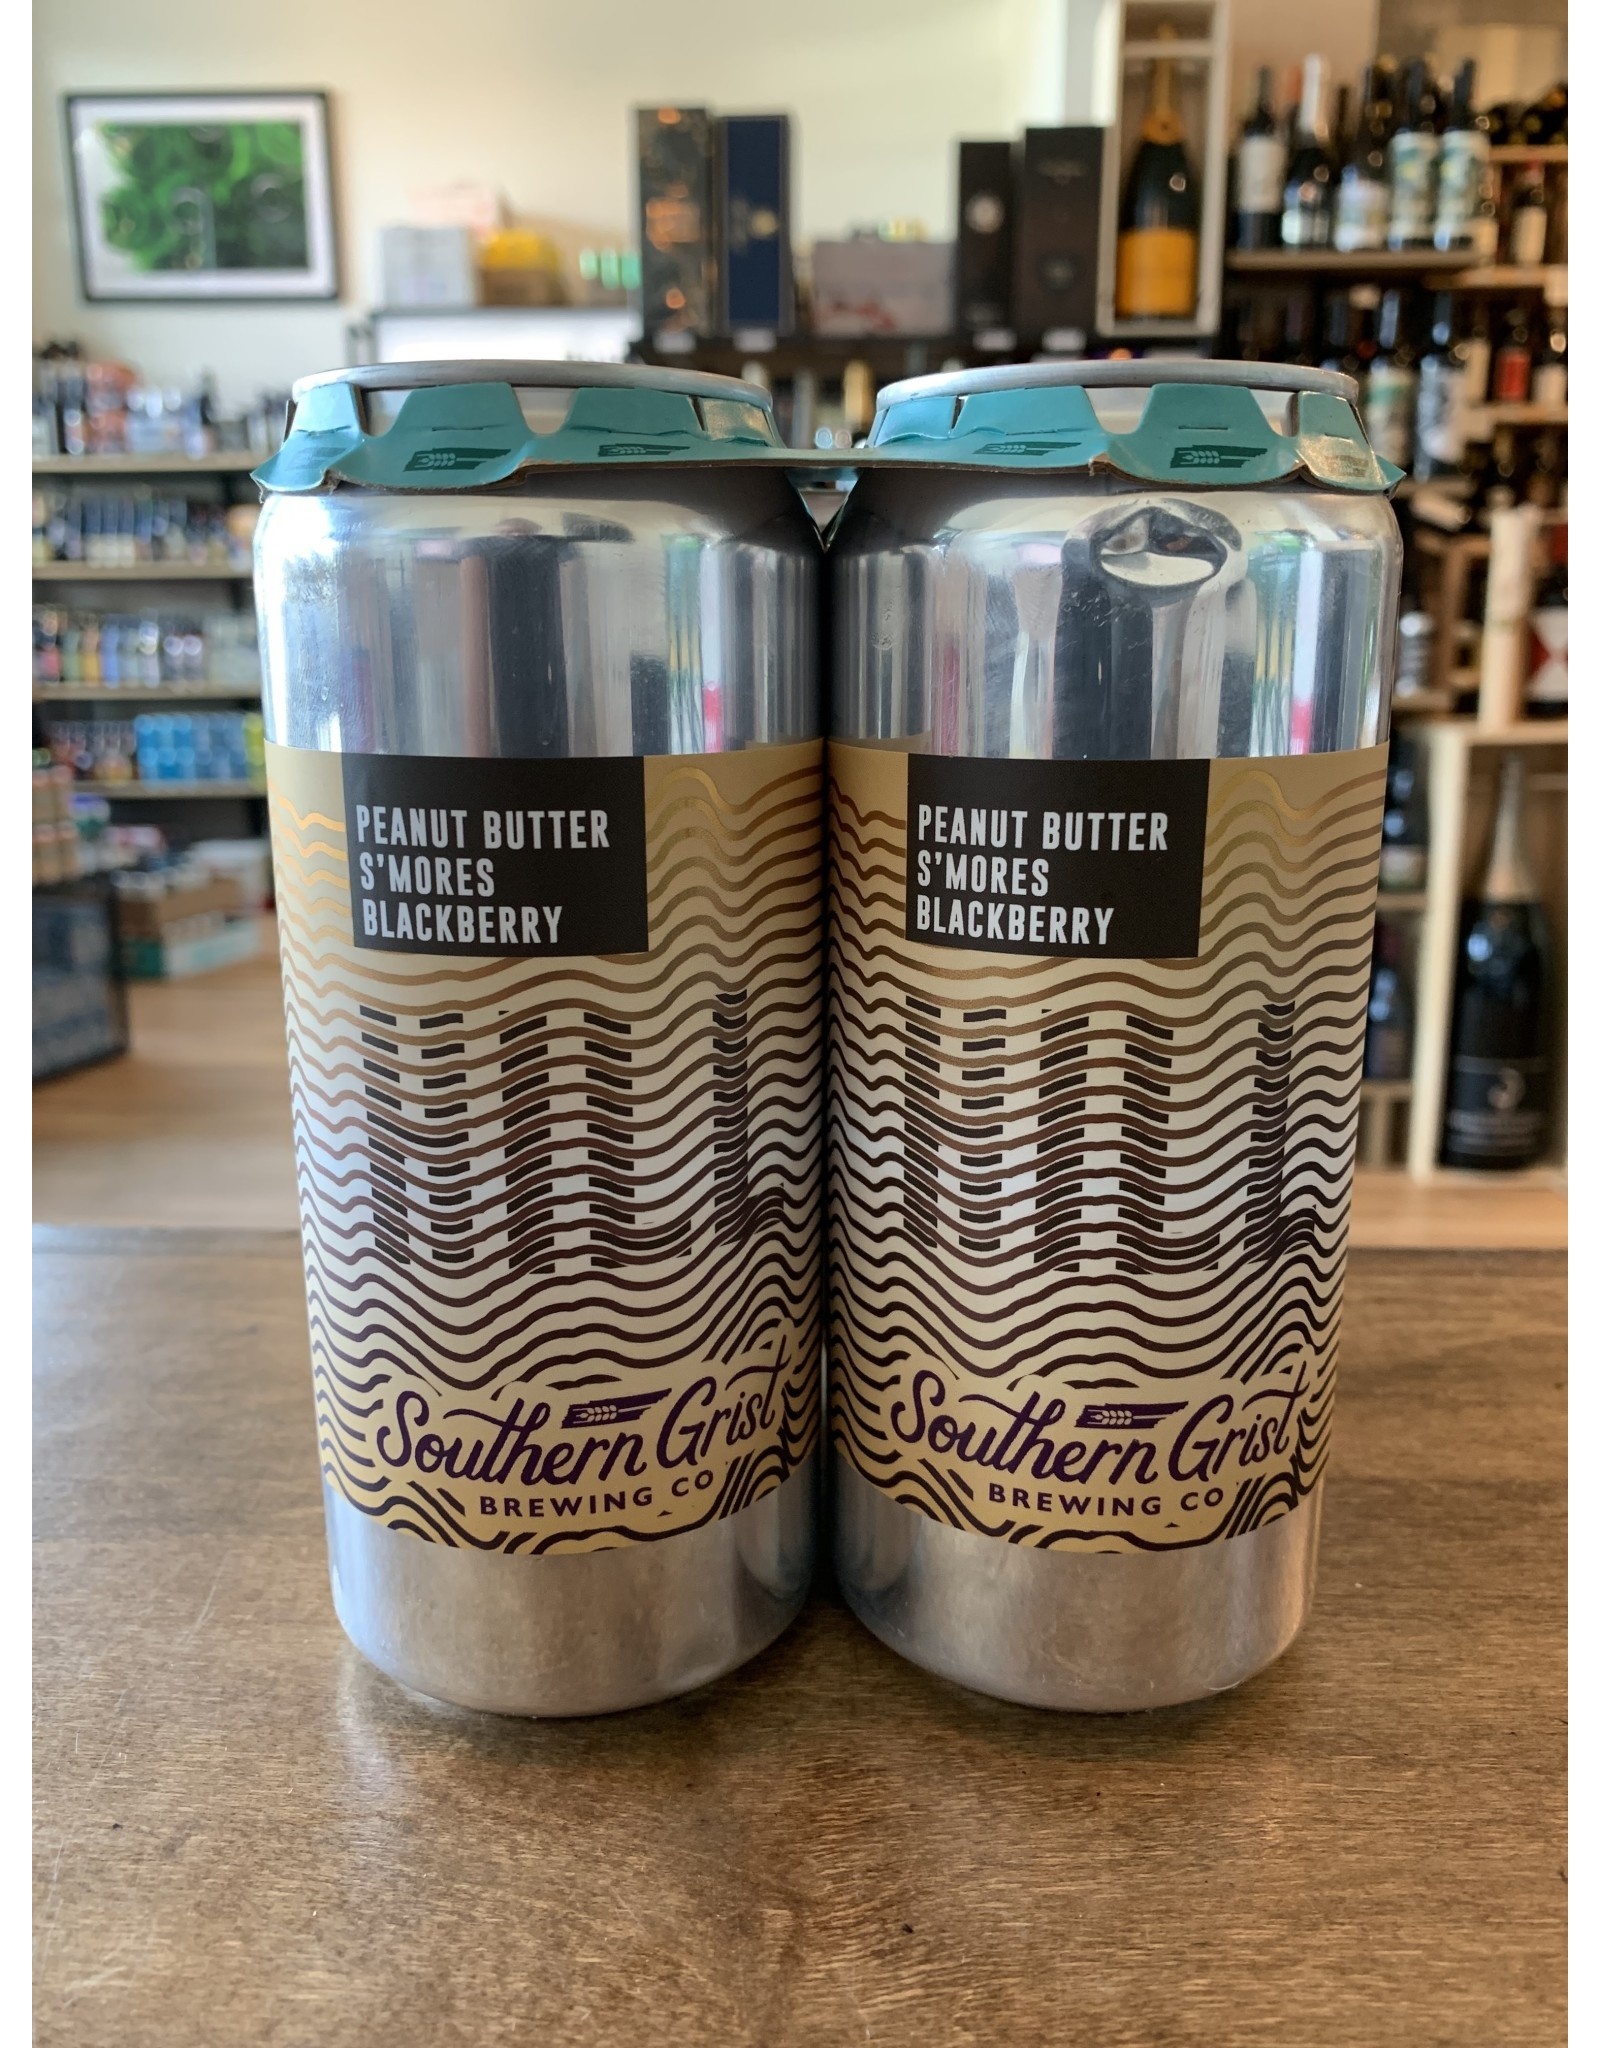 Southern Grist Brewing Co. Southern GristBrewing Co. Peanut Butter S'Mores Blackberry Hill, Sour Ale